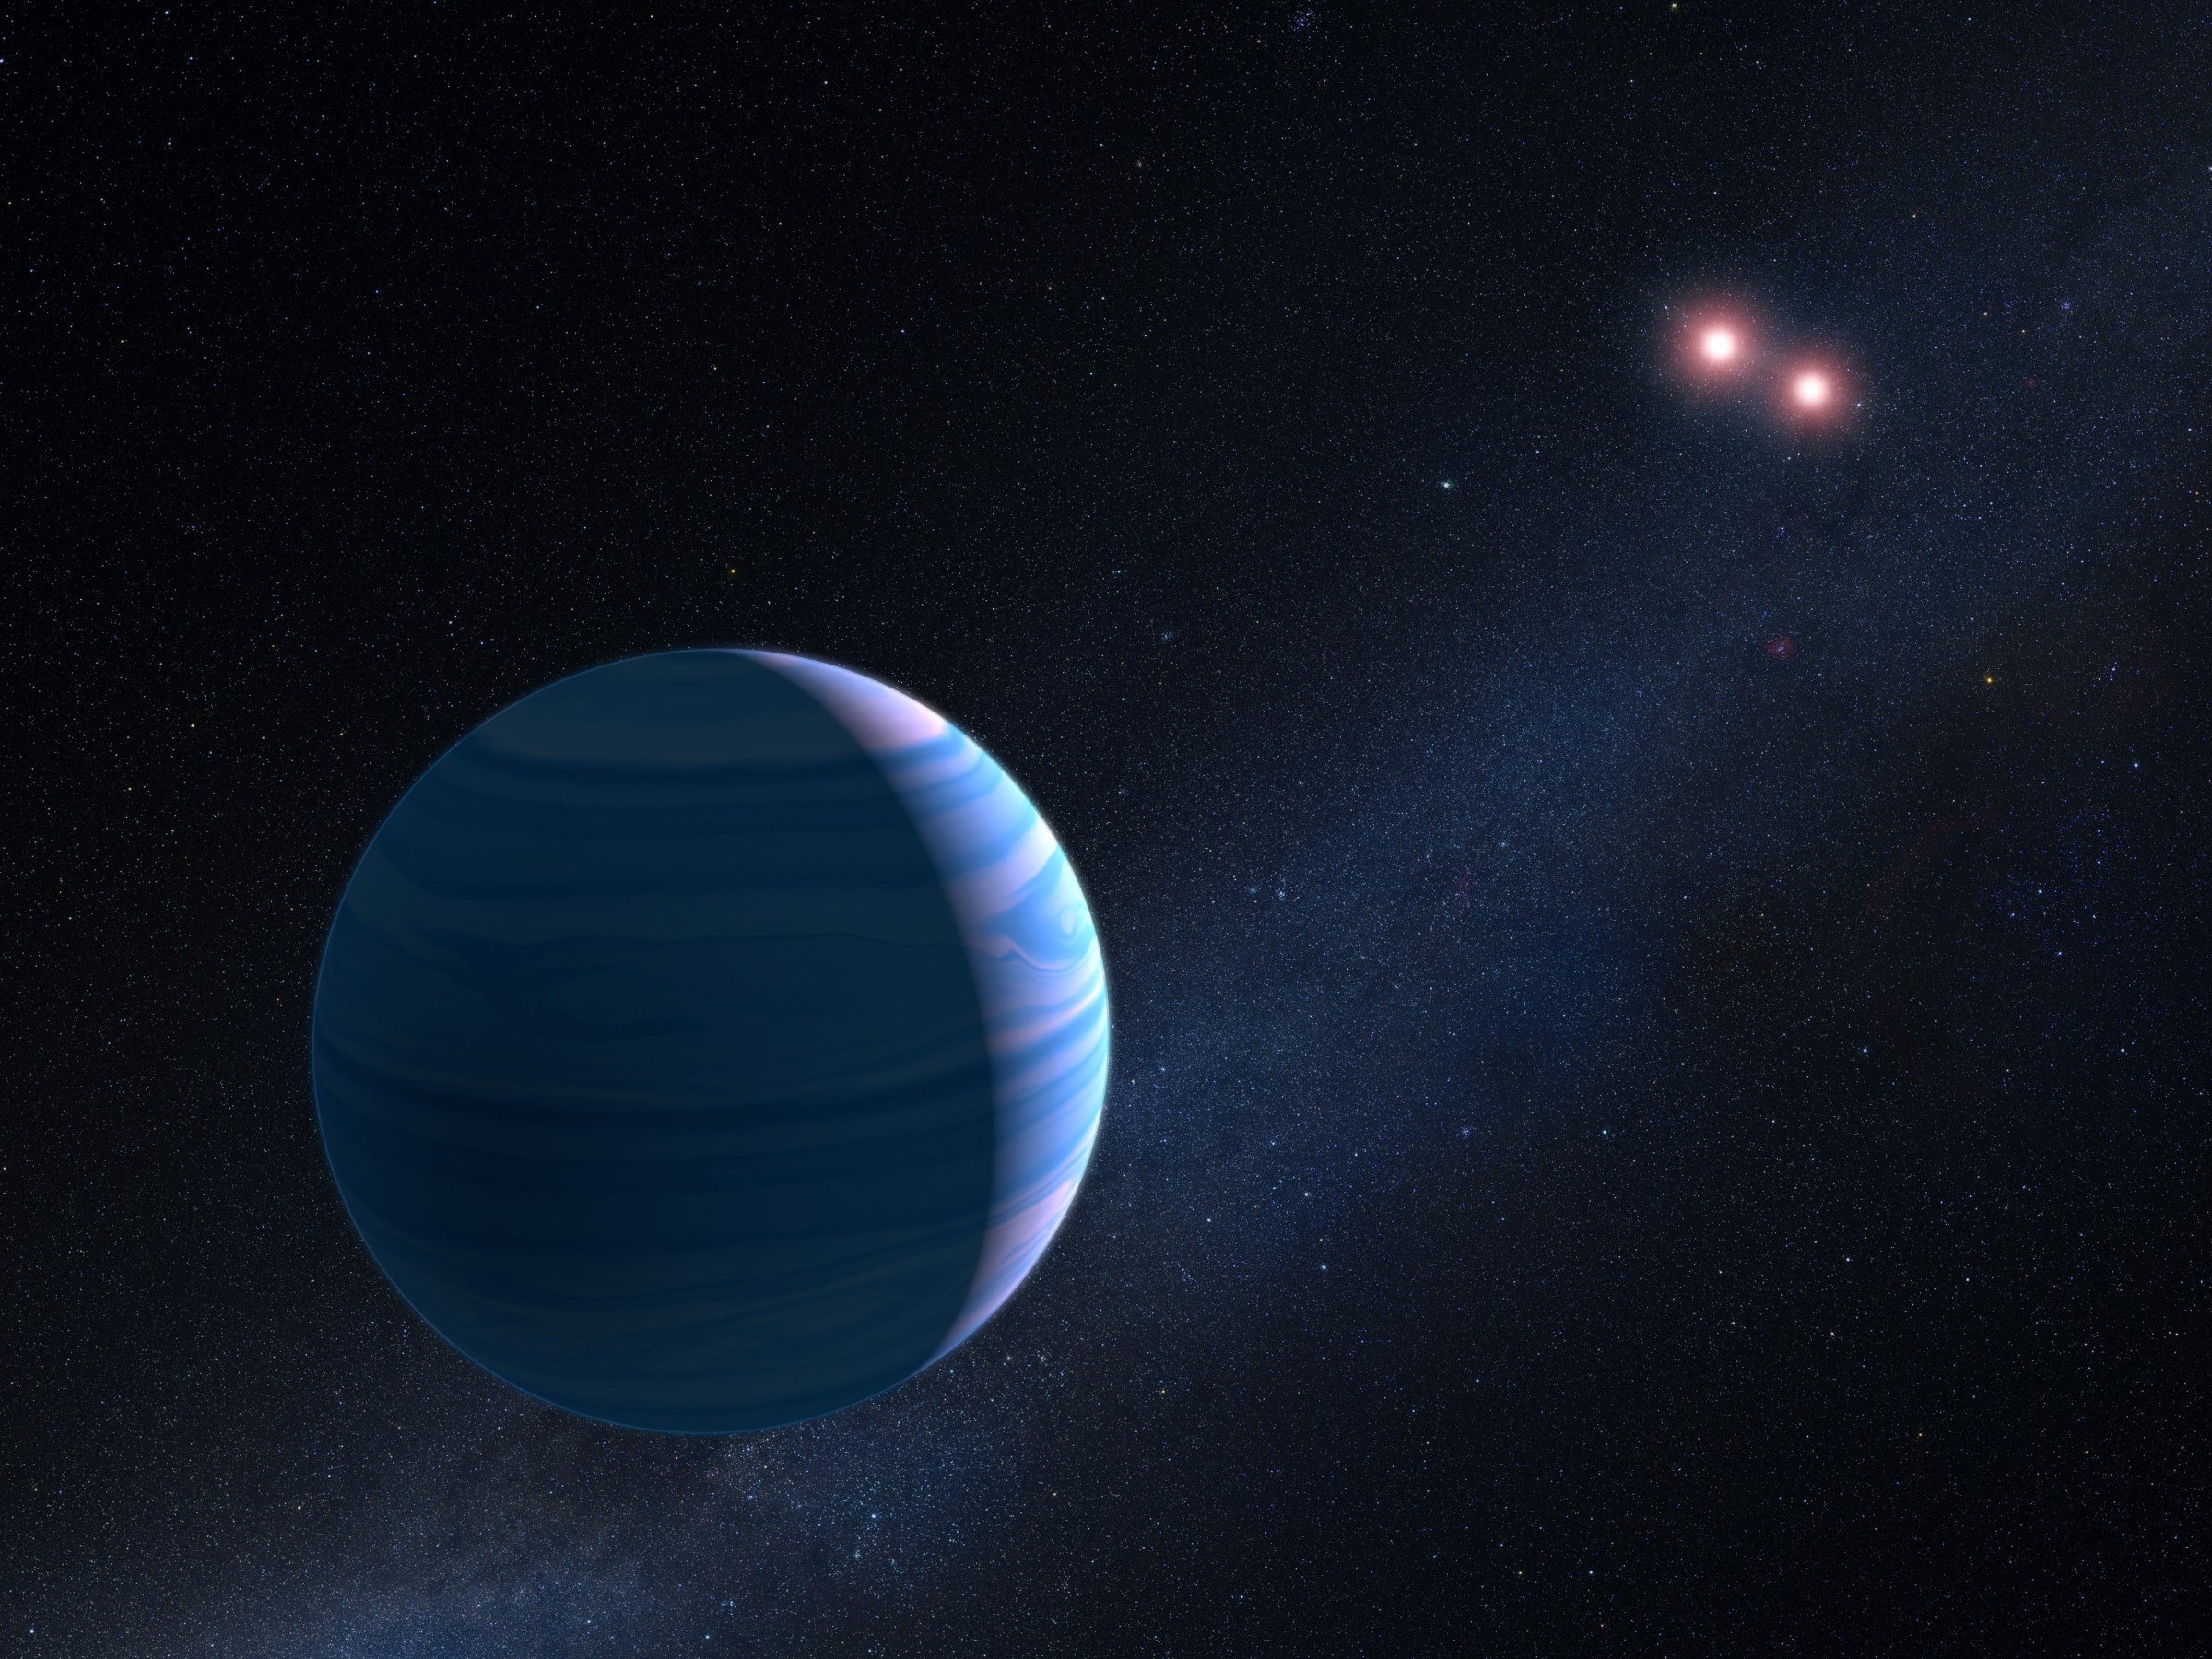 Artist’s impression of an exoplanet orbiting two stars